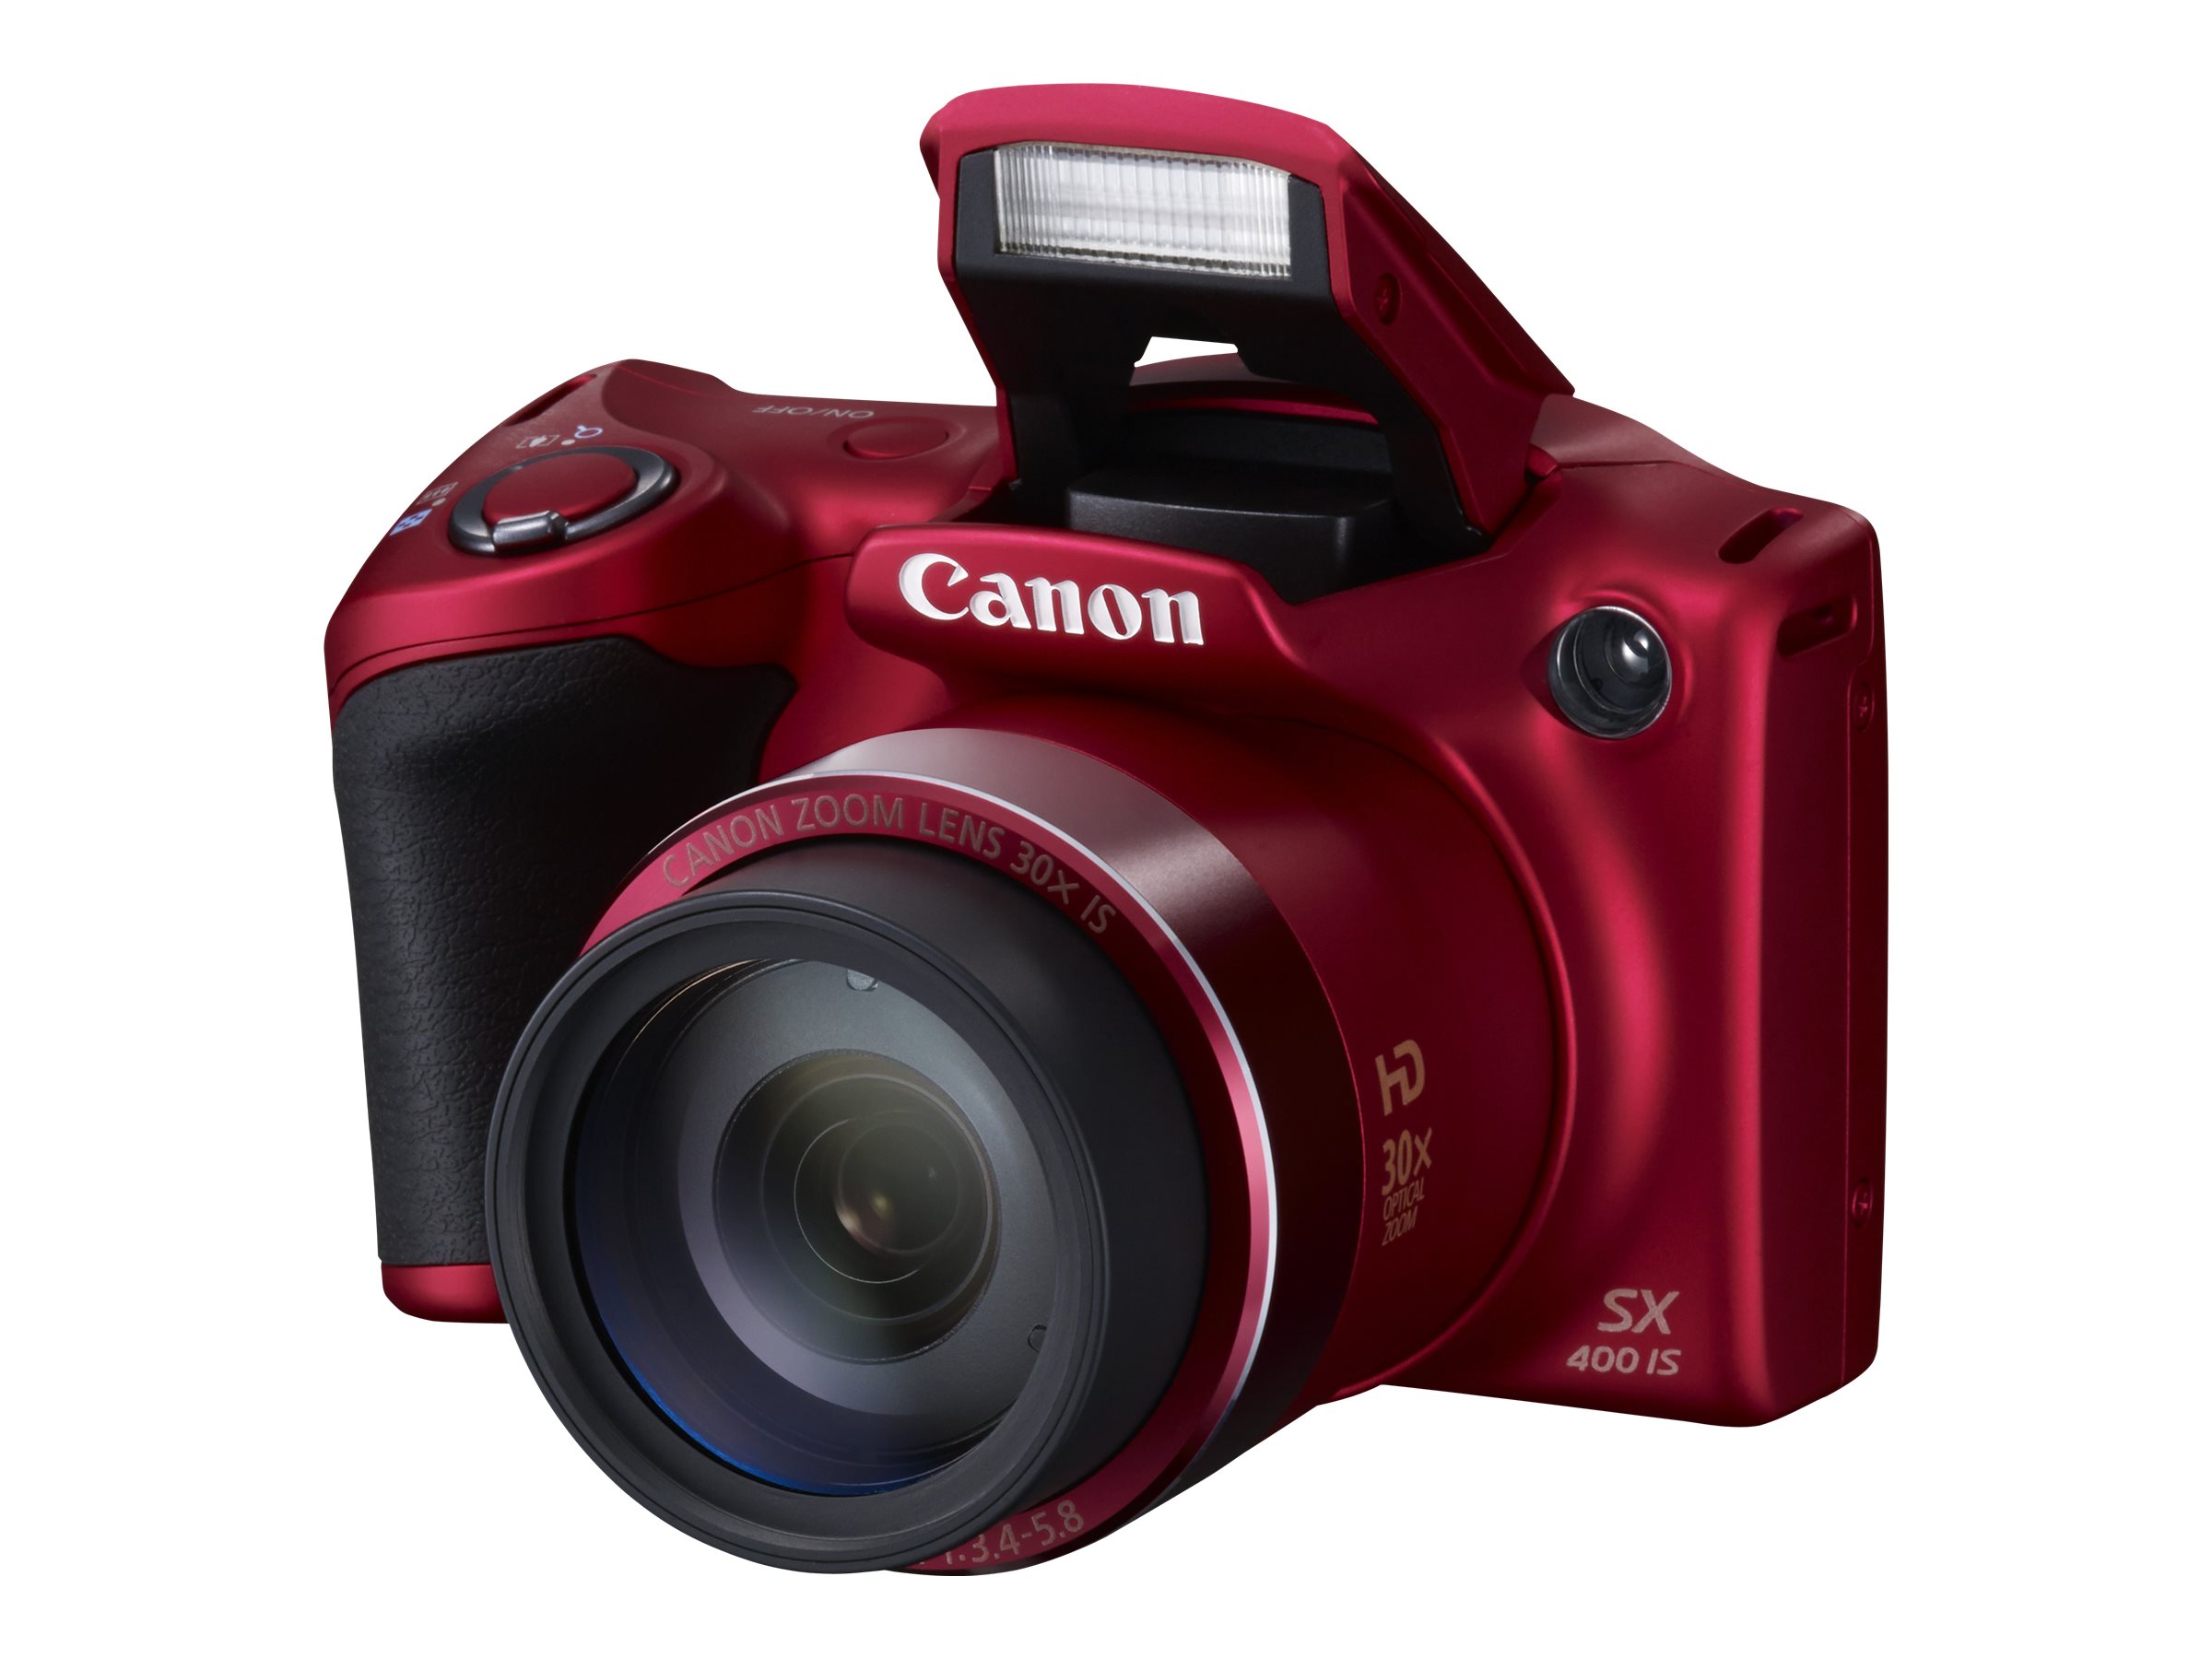 Canon PowerShot SX400 IS - Digital camera - High Definition - compact - 16.0 MP - 30 x optical zoom - red - image 63 of 72